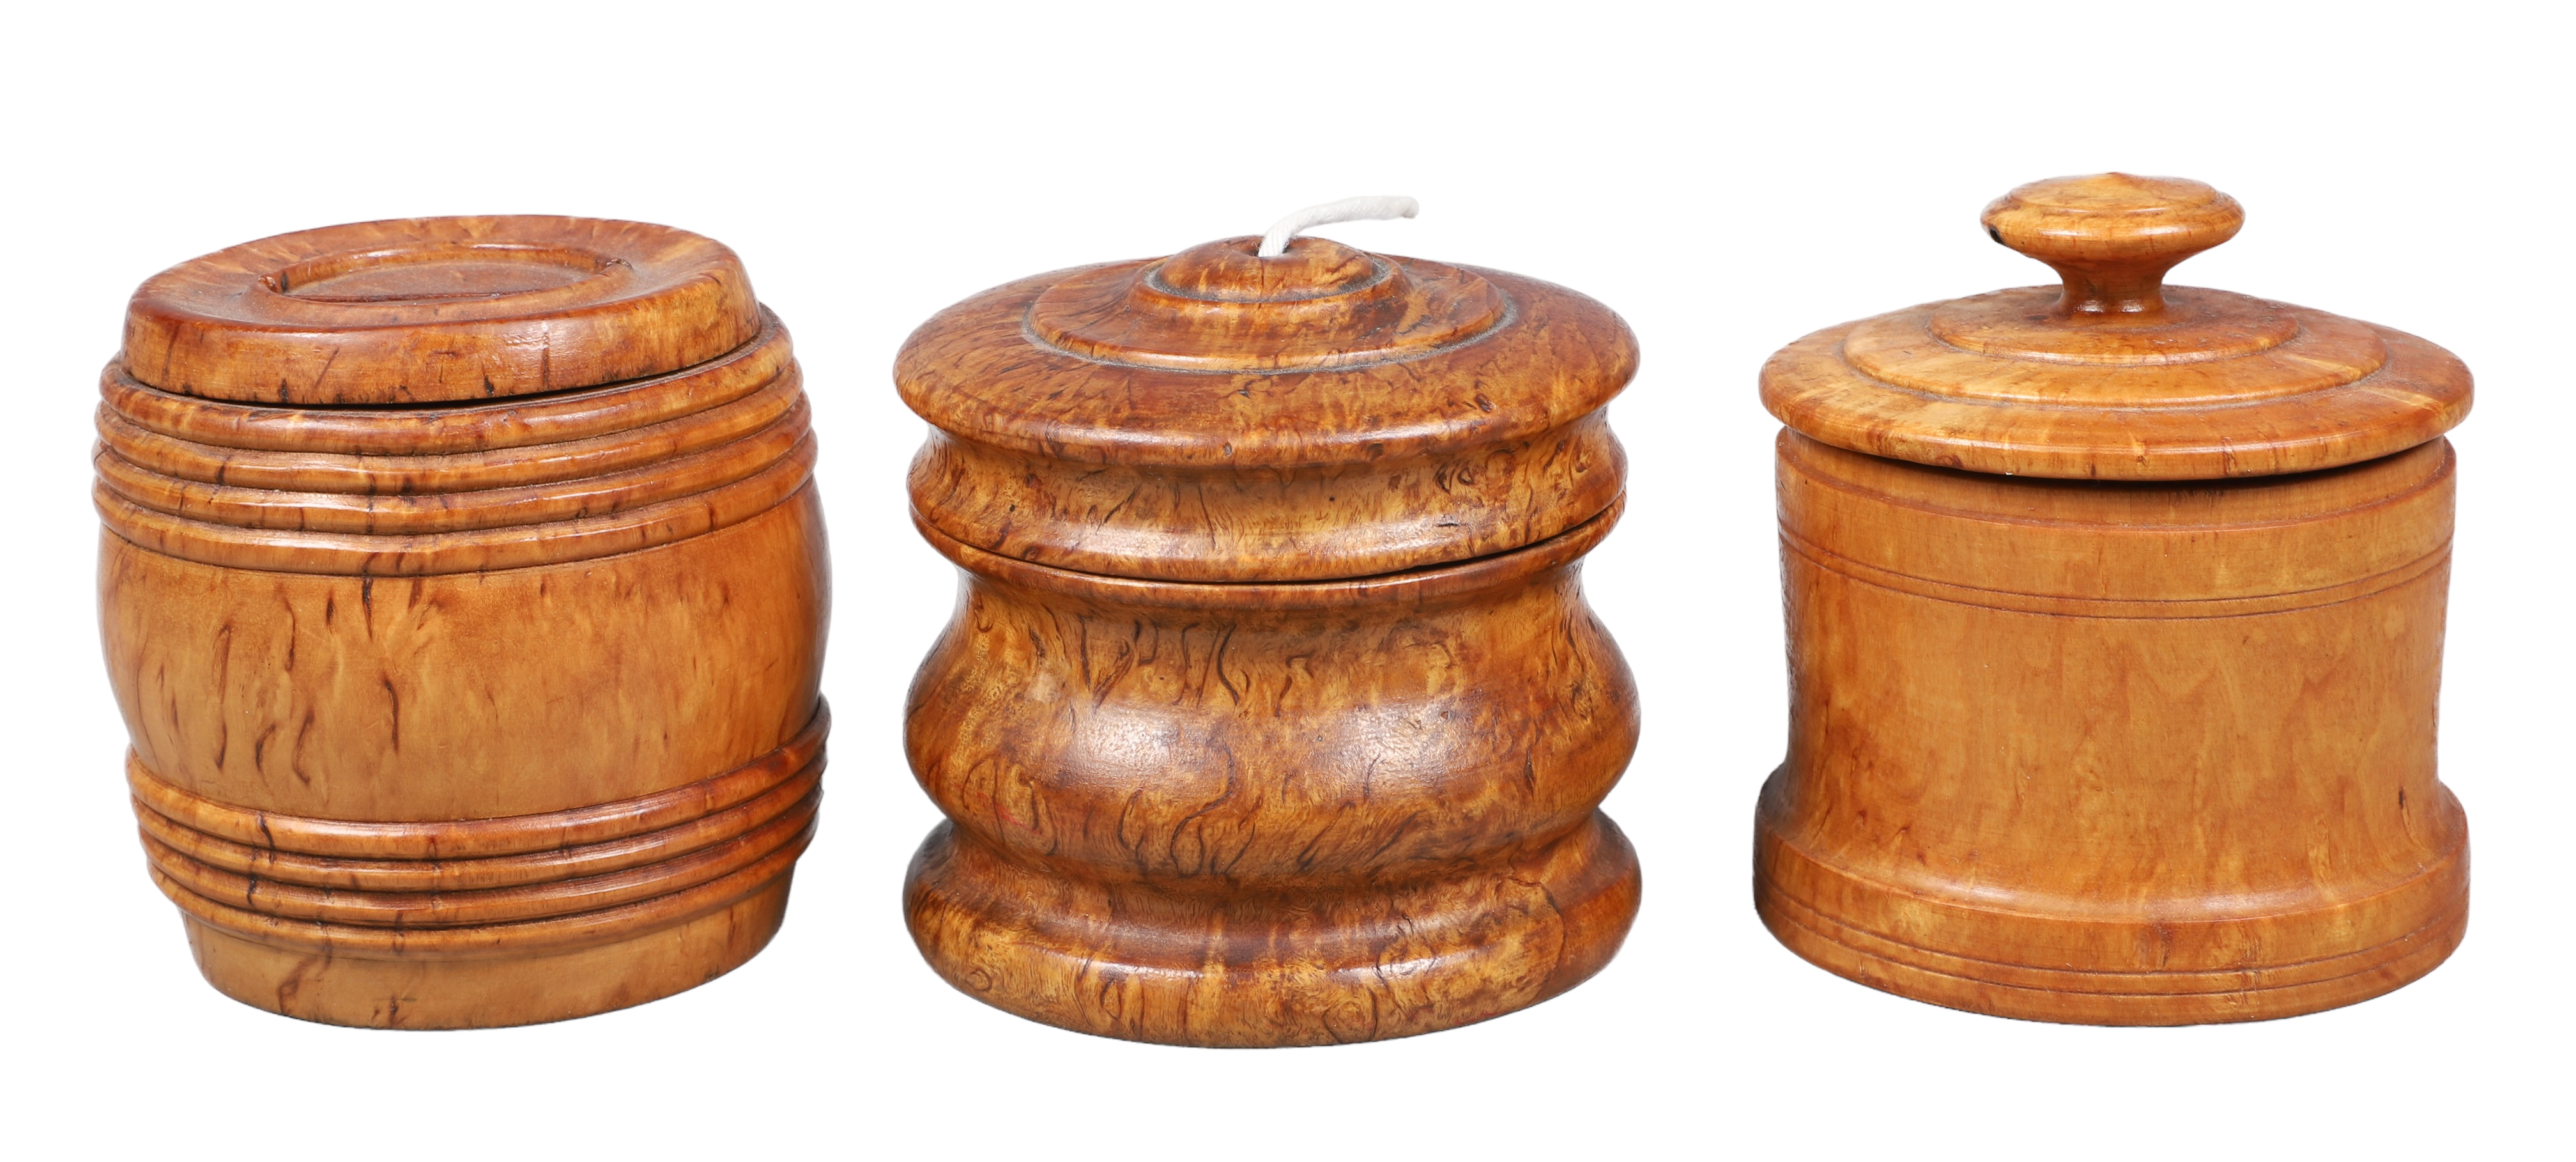  3 Burl woodl box bank and string 2e1520